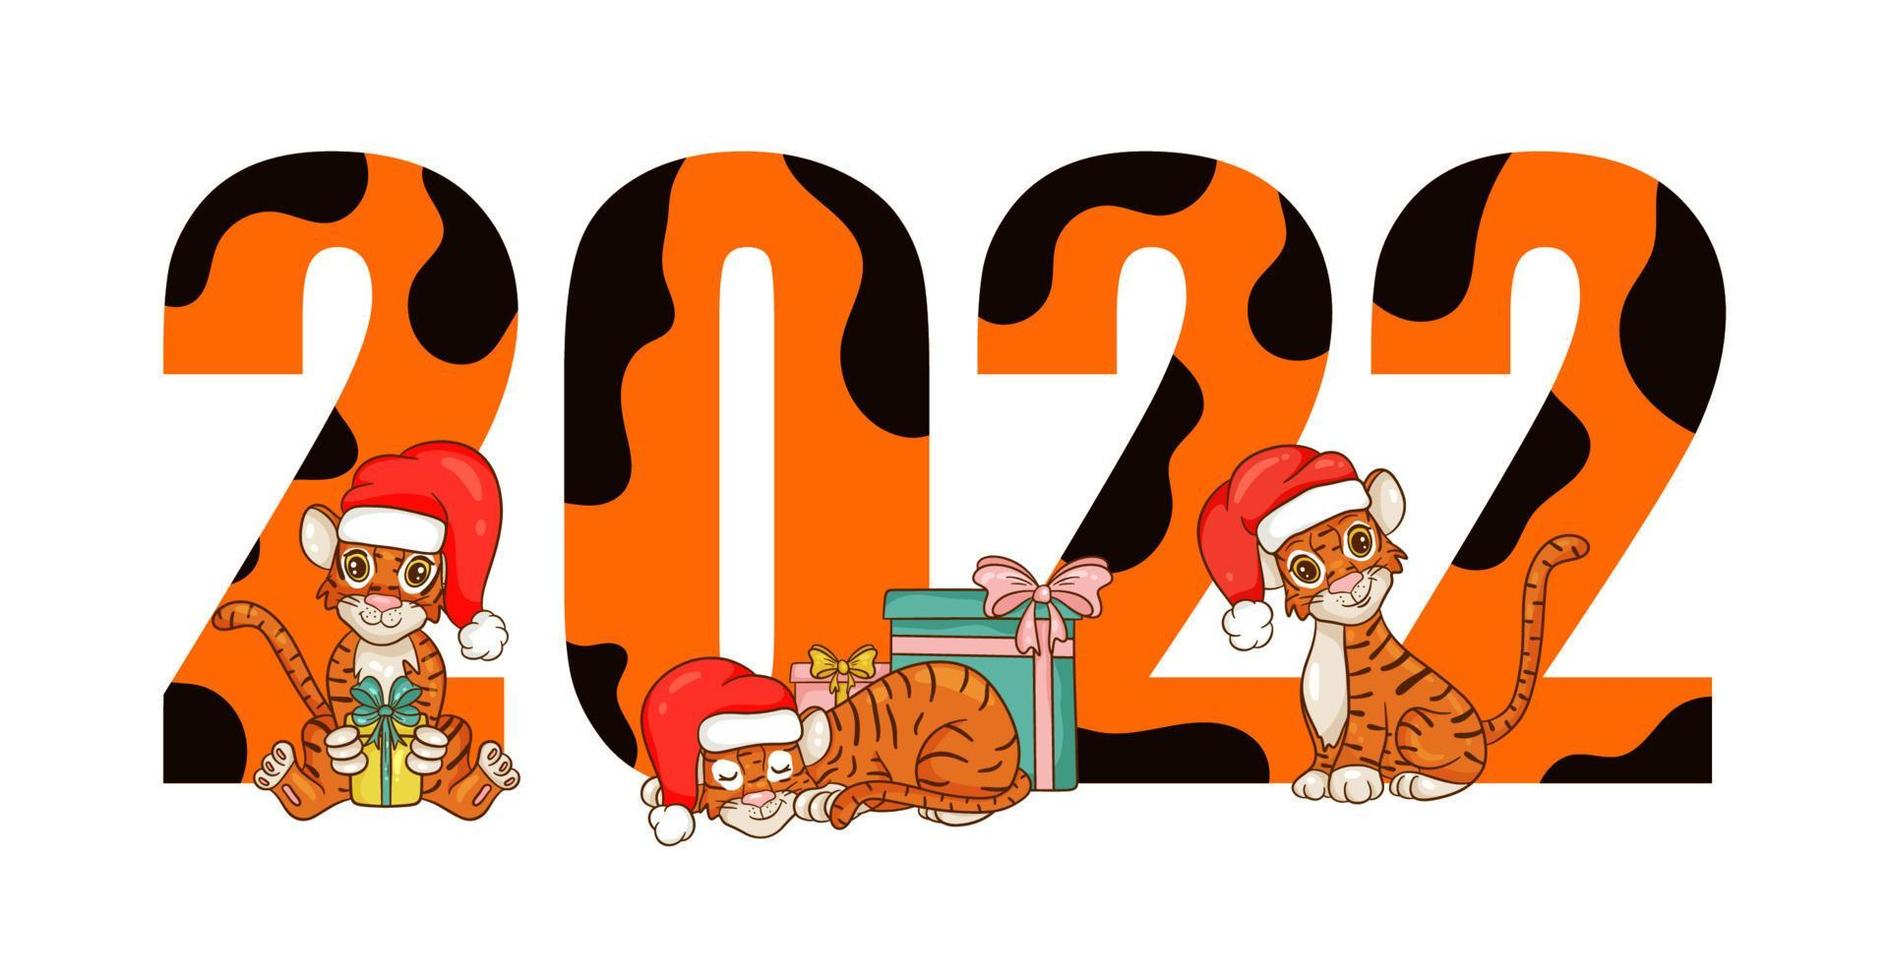 Happy New Year 2022 text design with cartoon style with tigers. The symbol of the year according to the Chinese calendar. Design brochure, template, postcard, banner. Vector illustration.